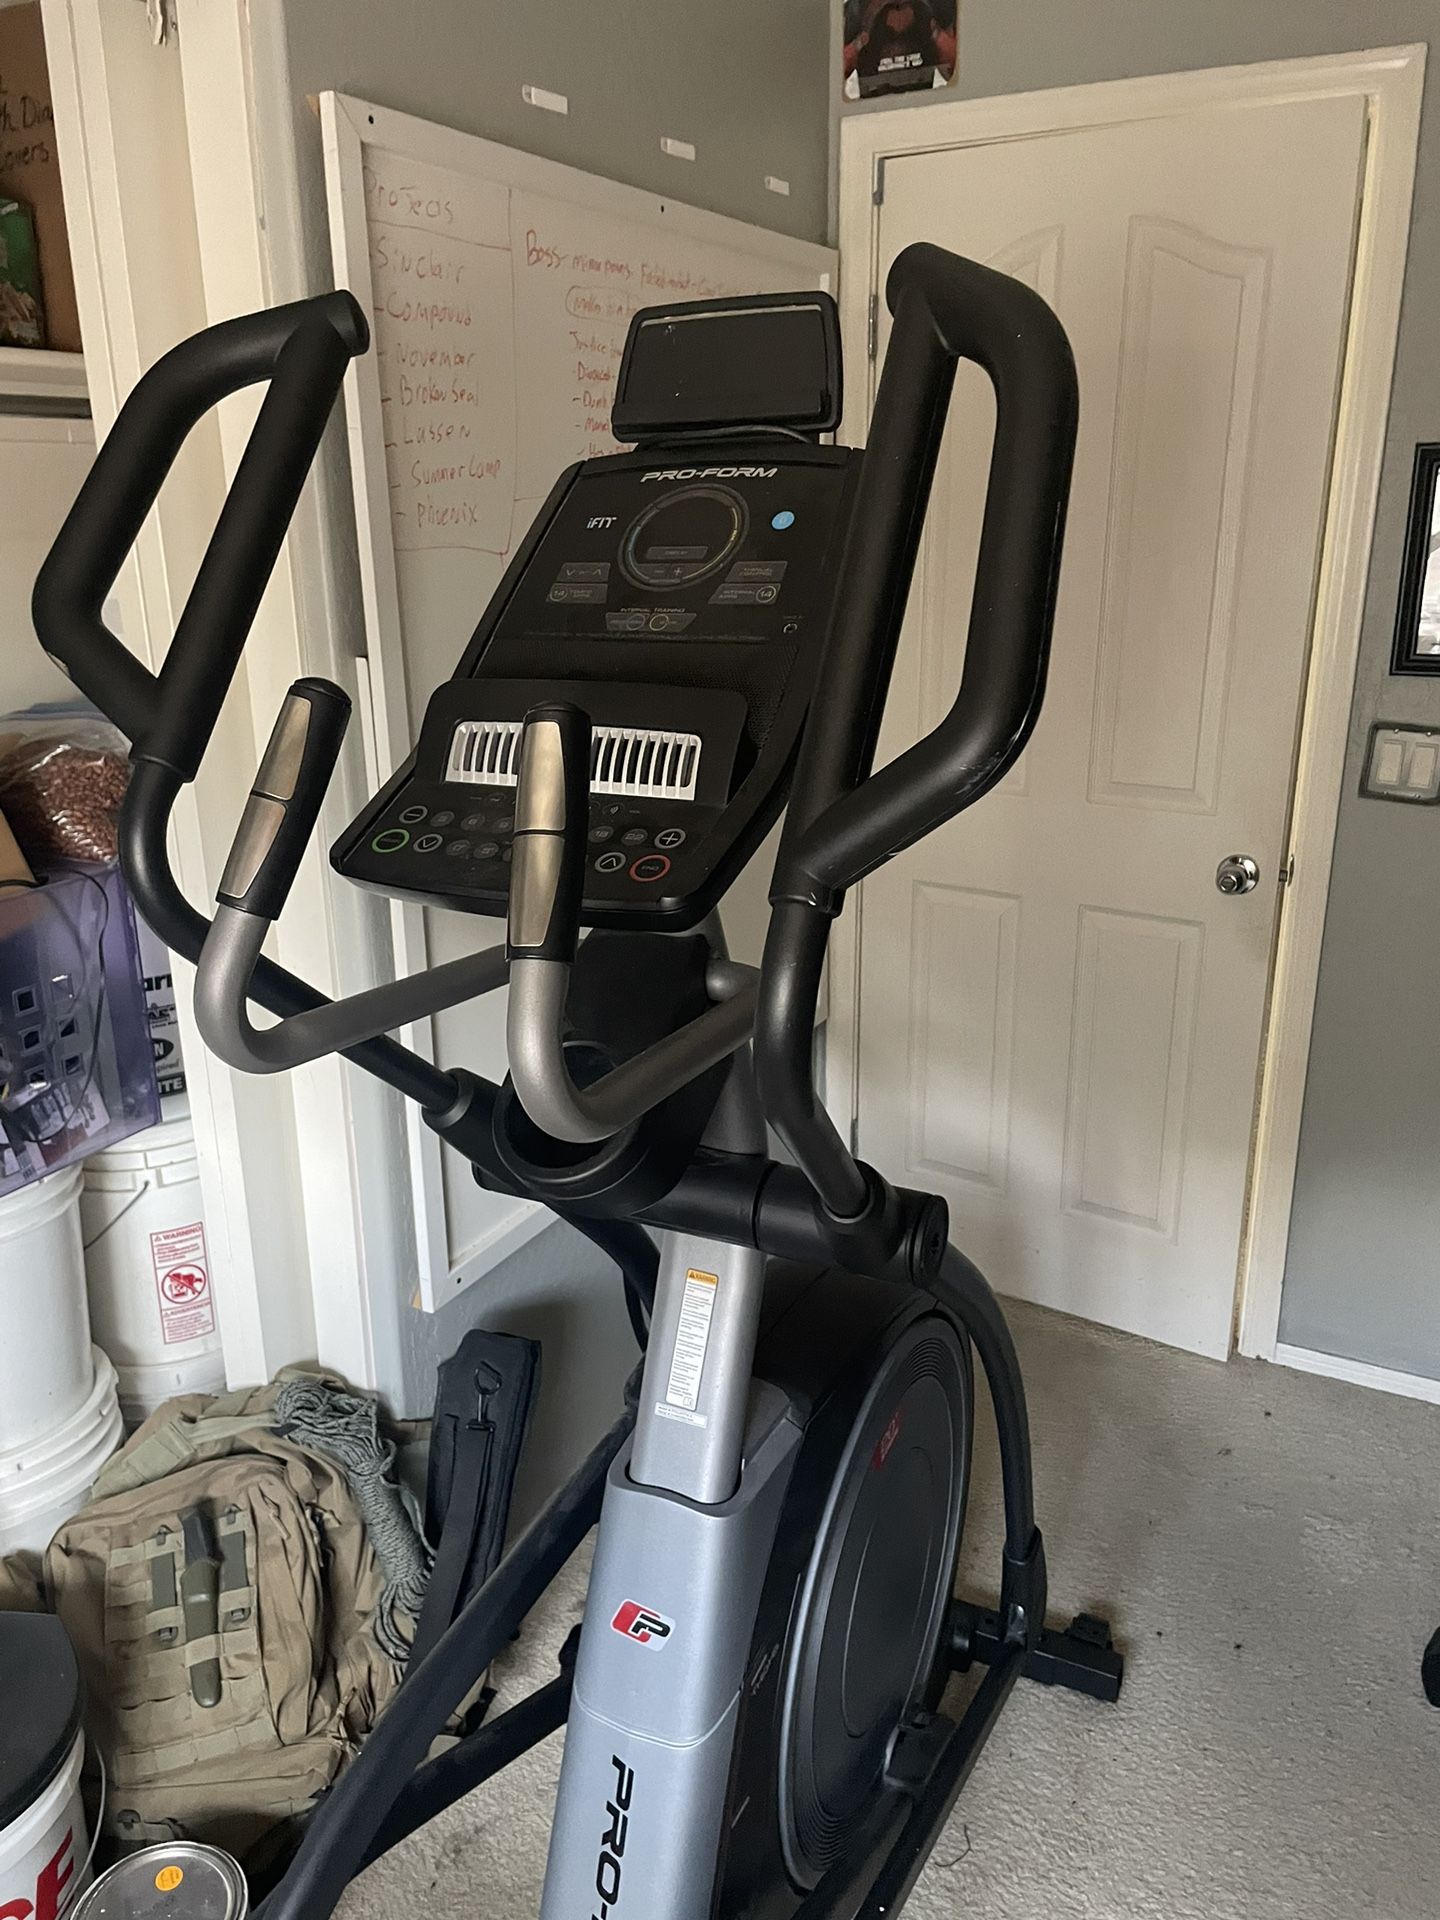 Pro Form Elliptical From Costco